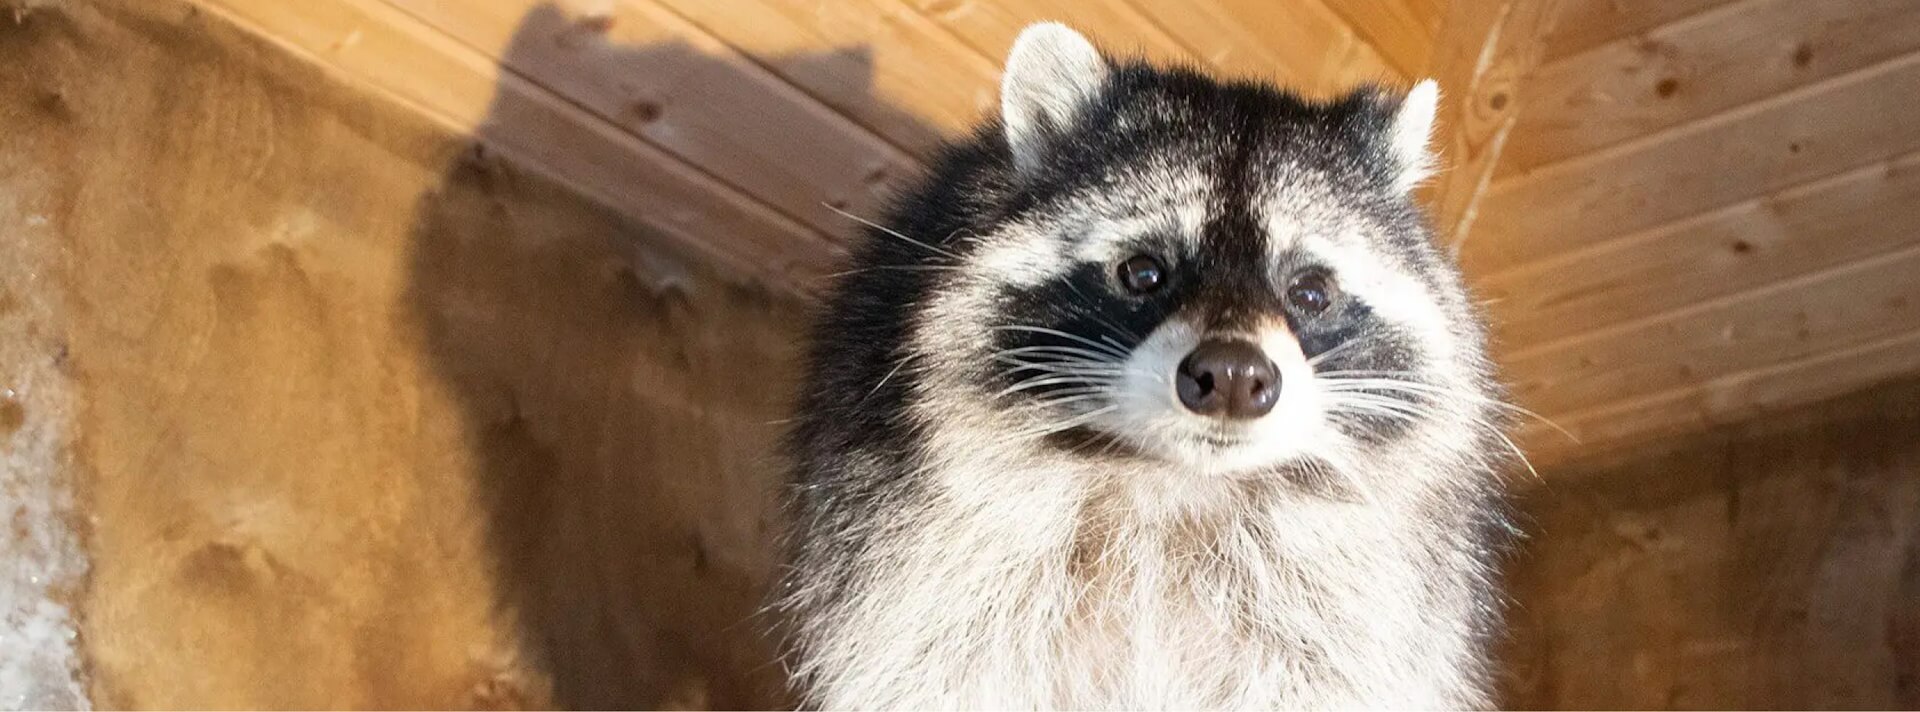 racoon found in house attic